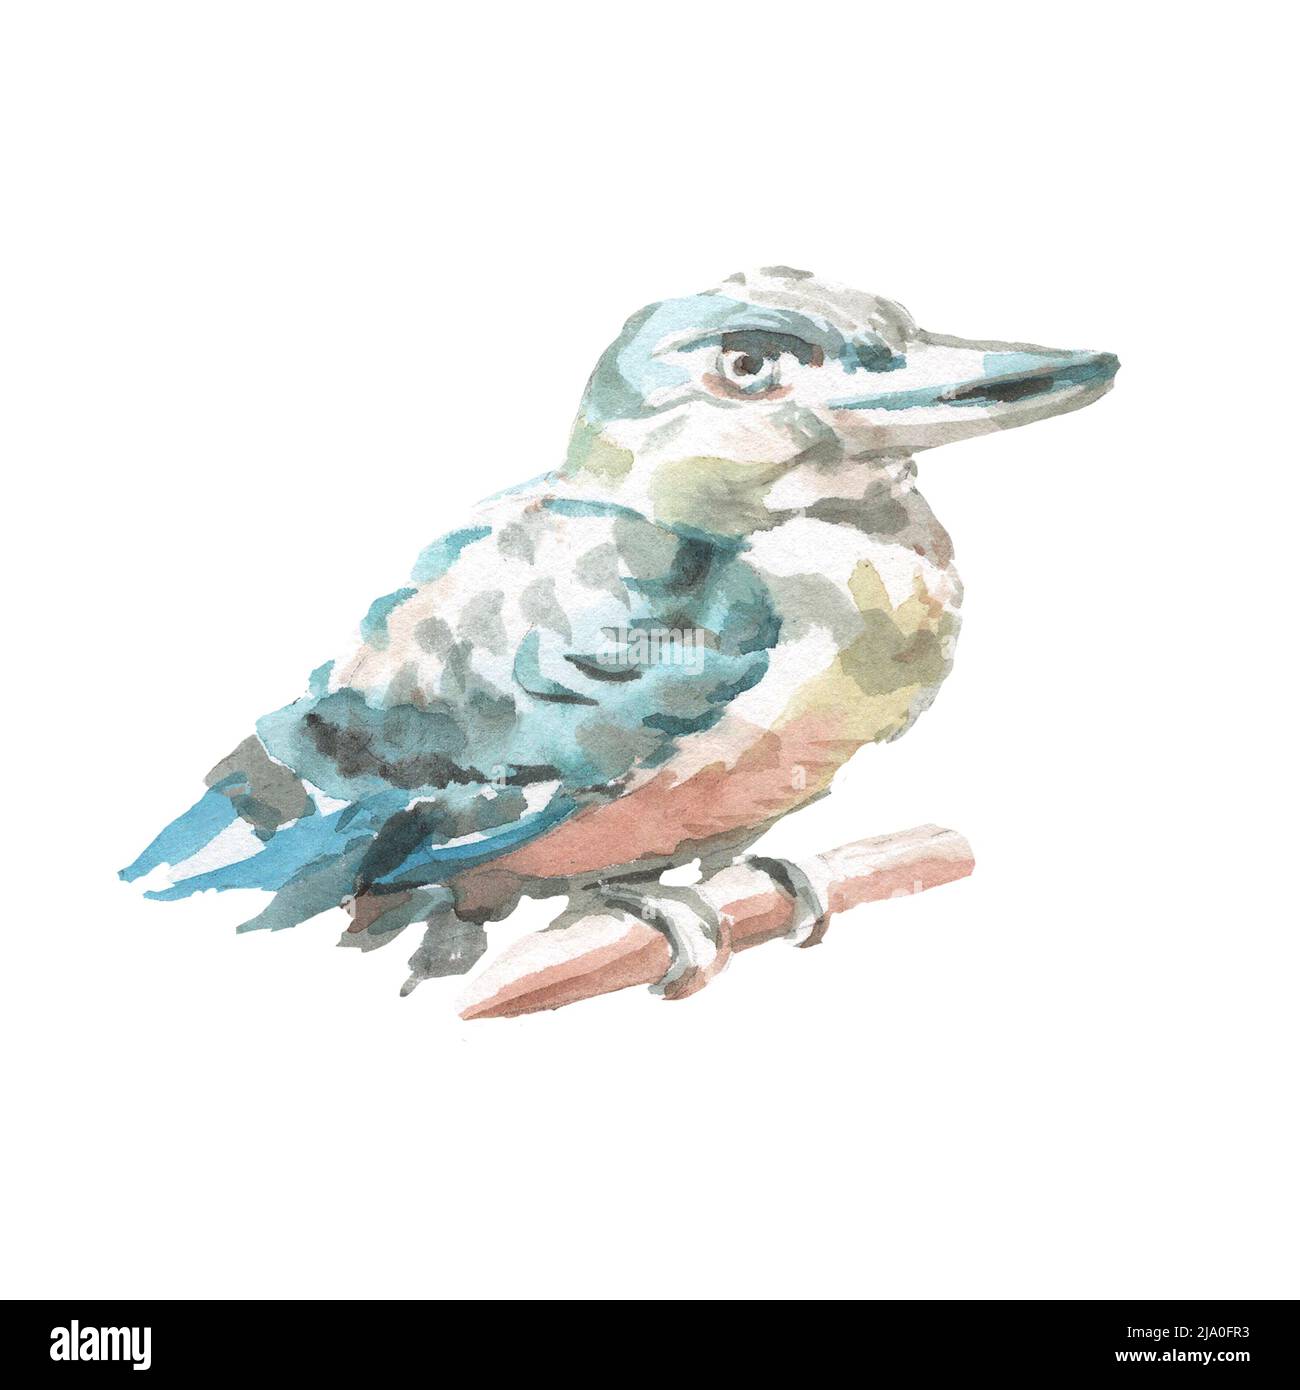 Kookaburra bird Australia nature wild watercolor illustration hand drawn isolated element on white background cute baby pictures pictures Stock Photo